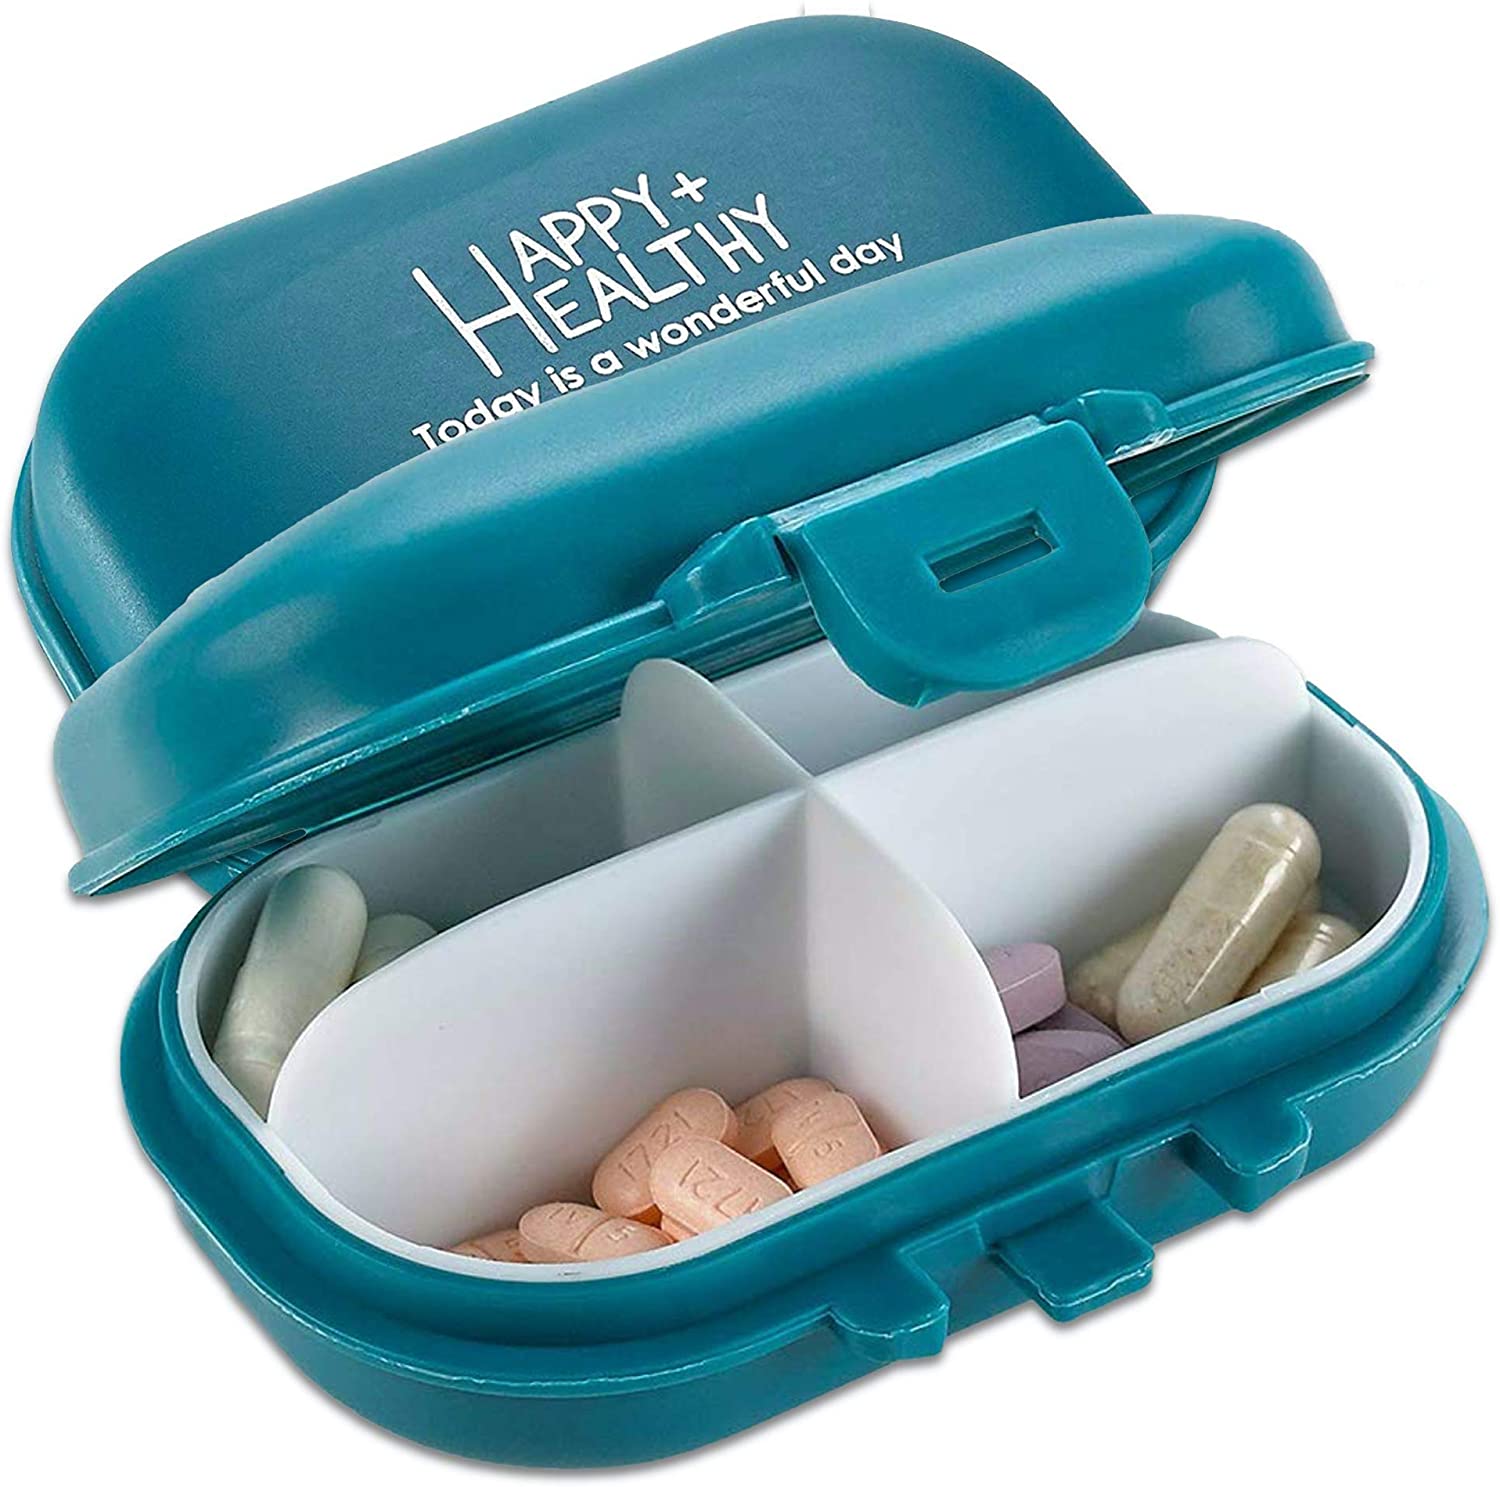 Weekly Pill Case Organizer 4 Times A Day Portable Travel Pill Box